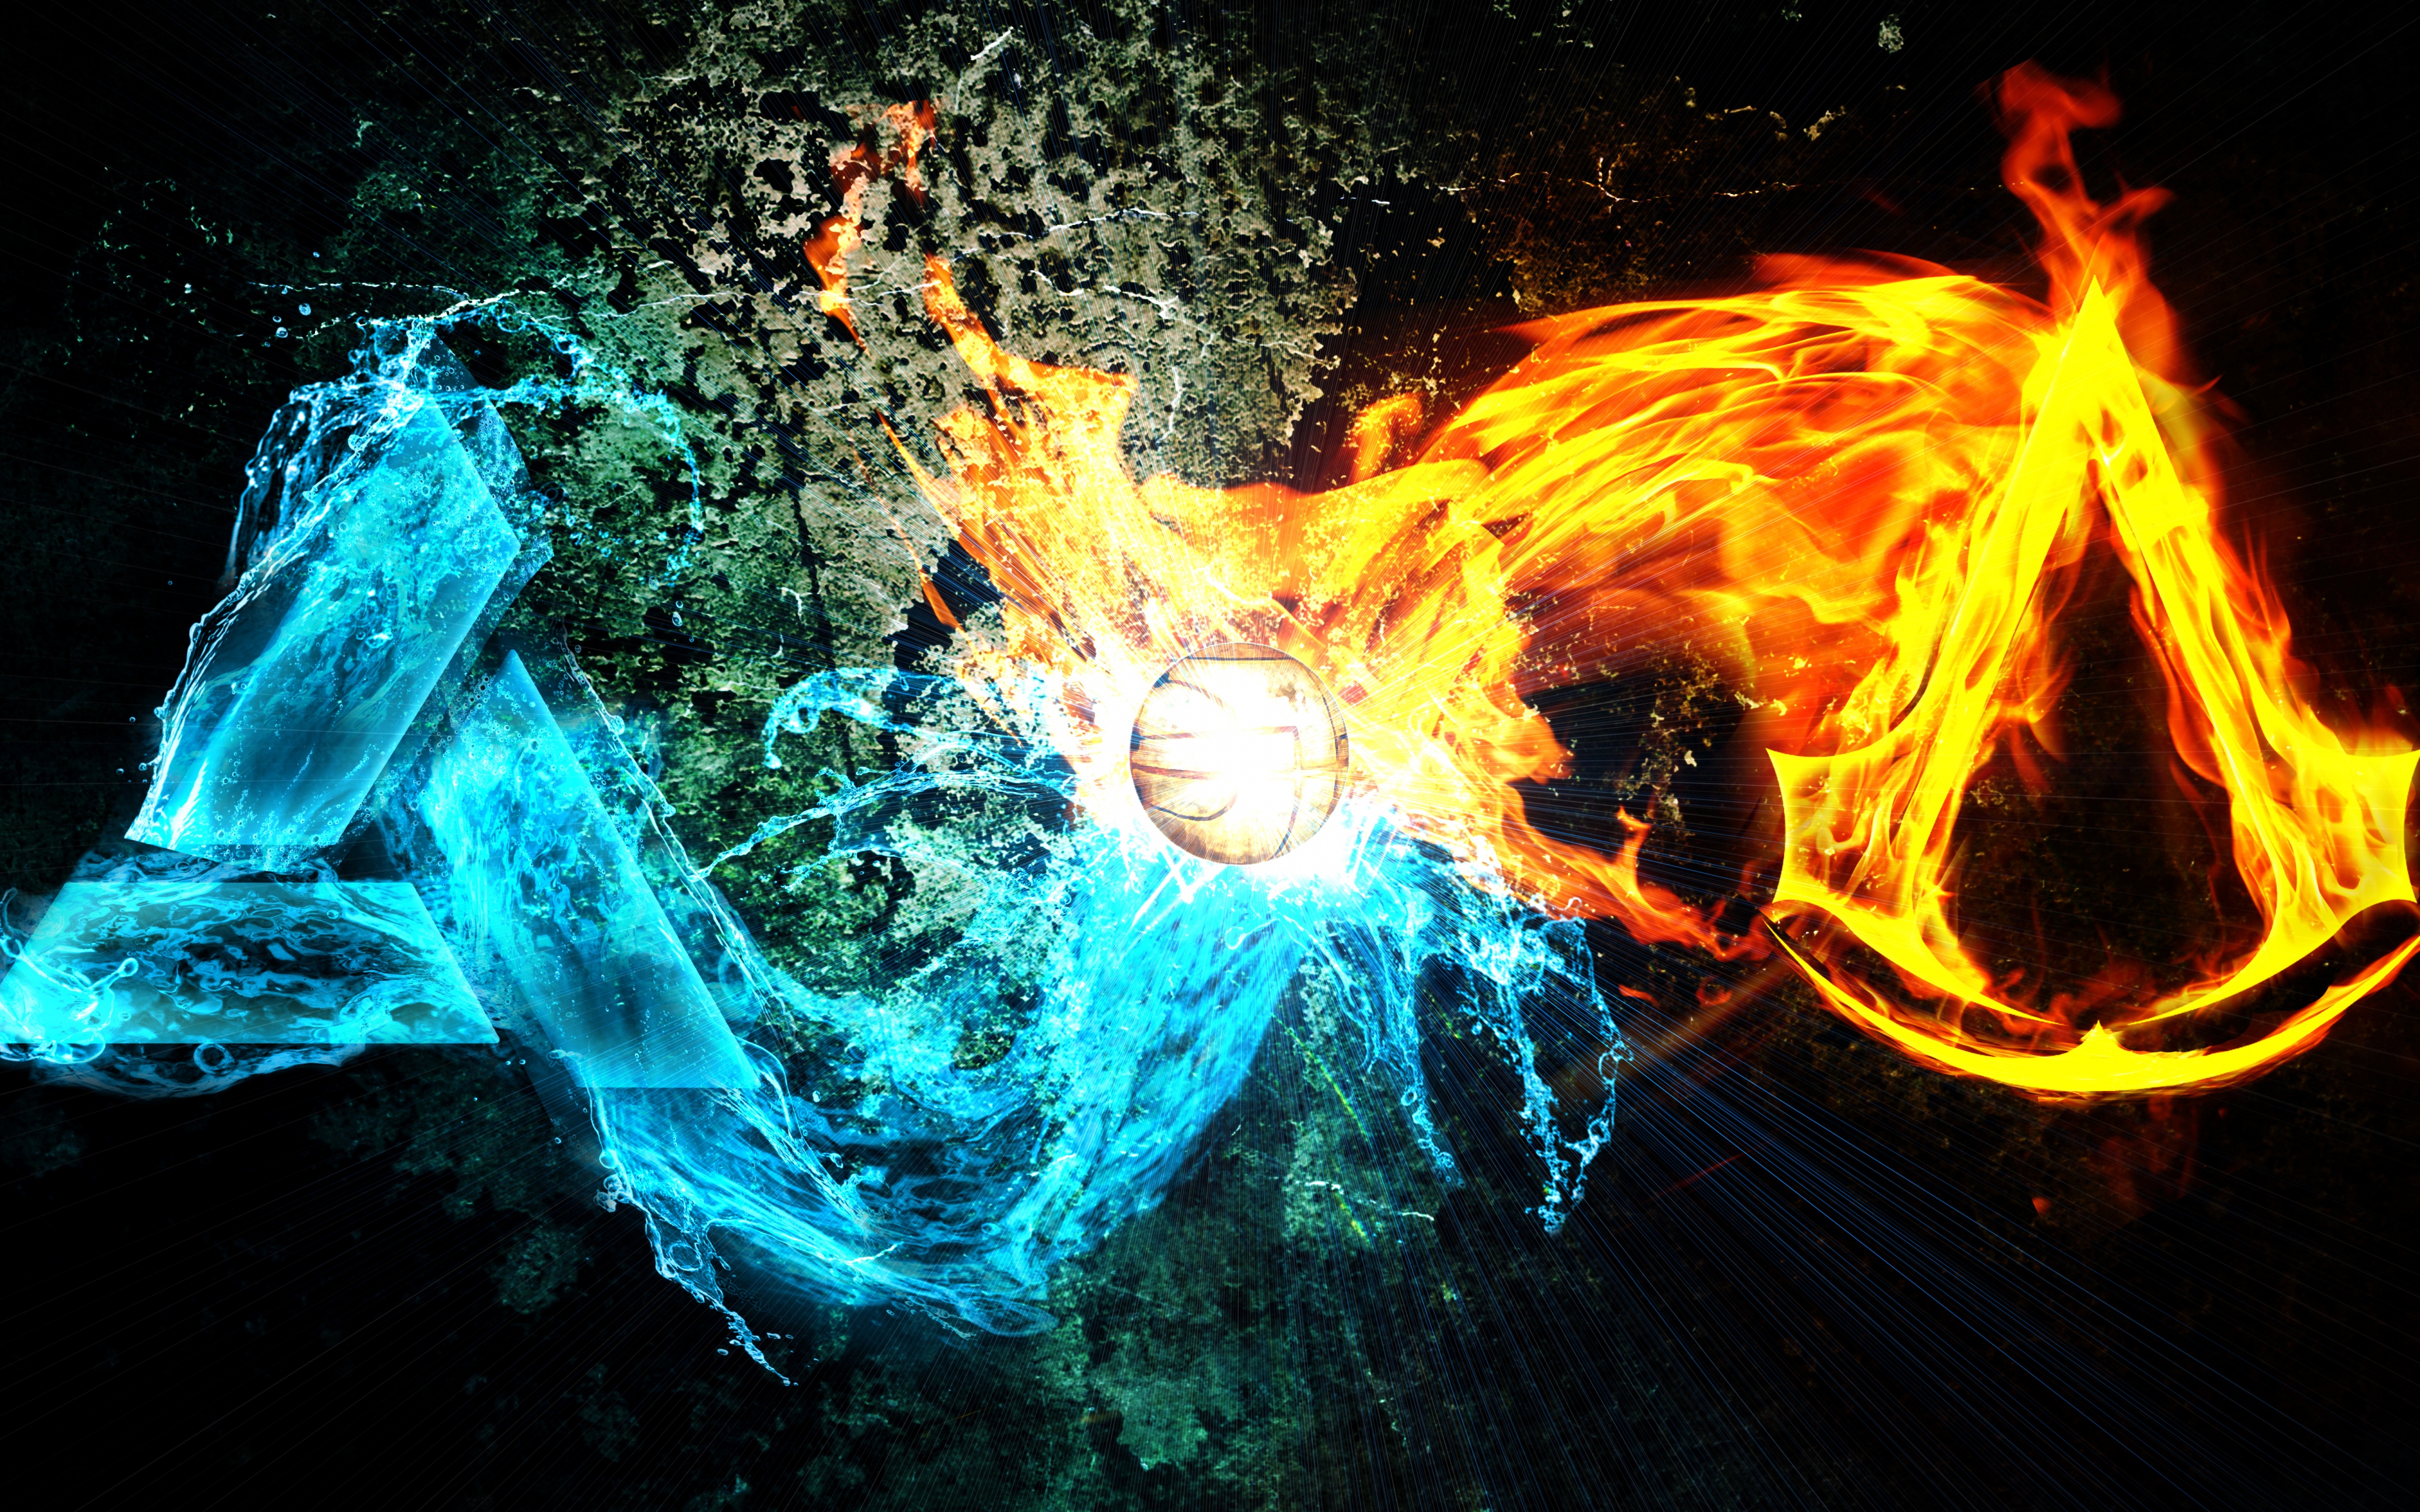 Games Wallpapers Group With 49 Items - Fire And Water Ball - HD Wallpaper 